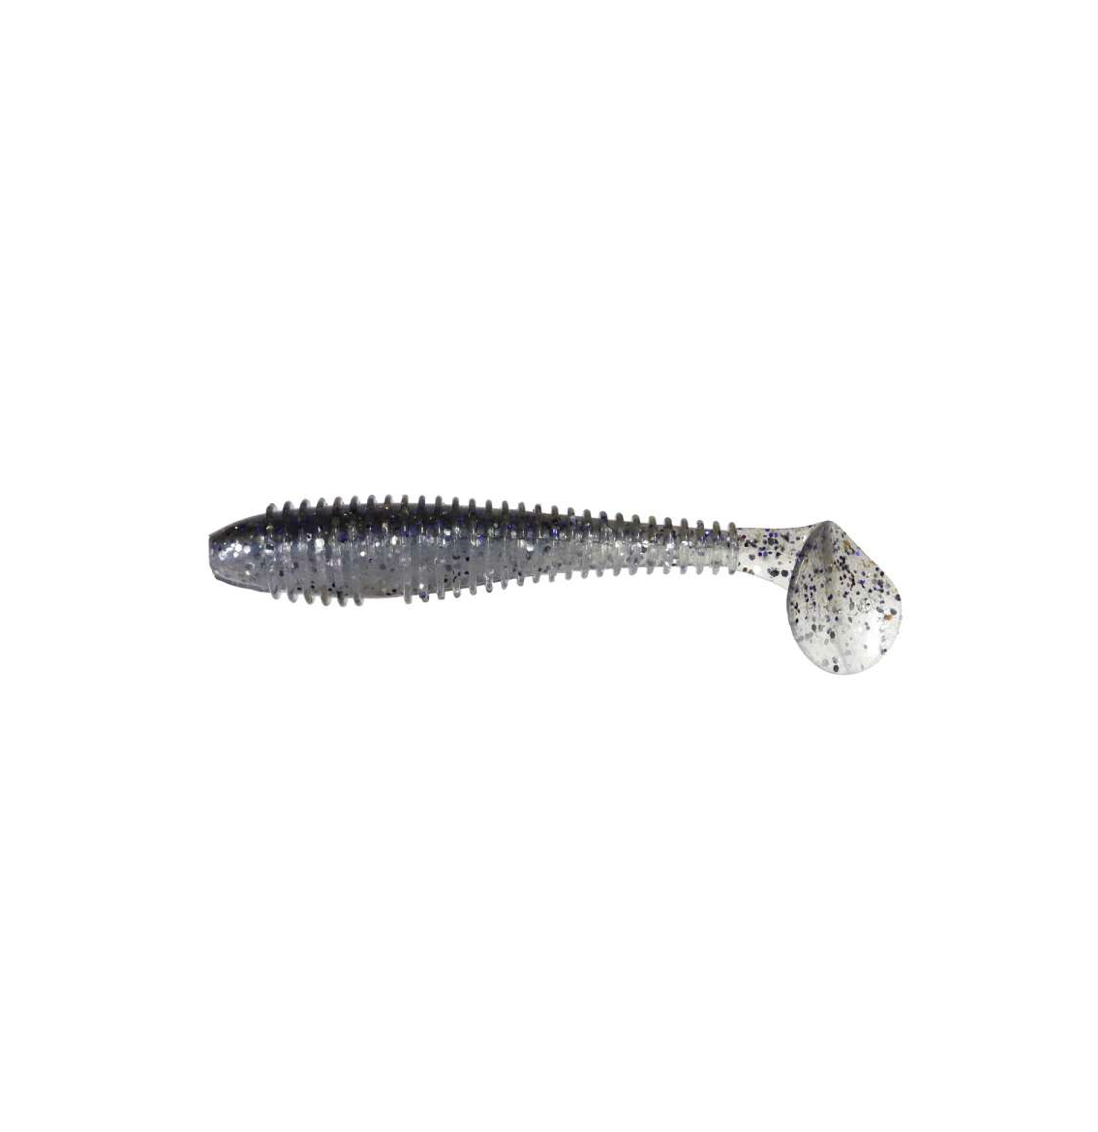 Keitech Swing Impact FAT (2.8 Inches) - Angler's Headquarters